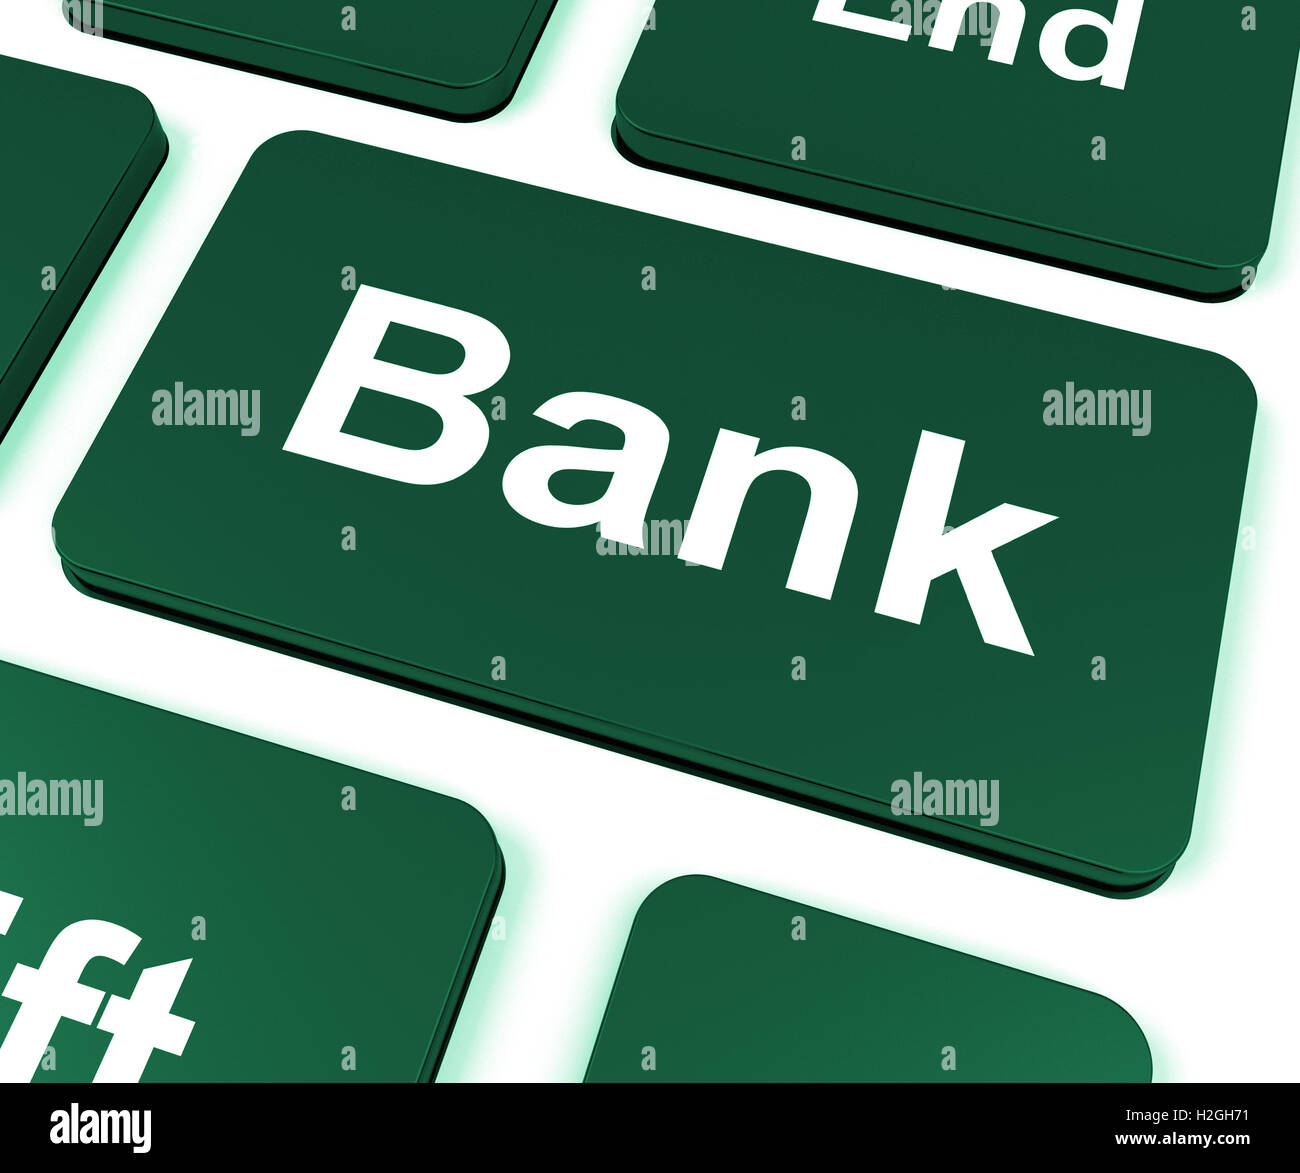 Bank Key Shows Online Or Internet Banking Stock Photo